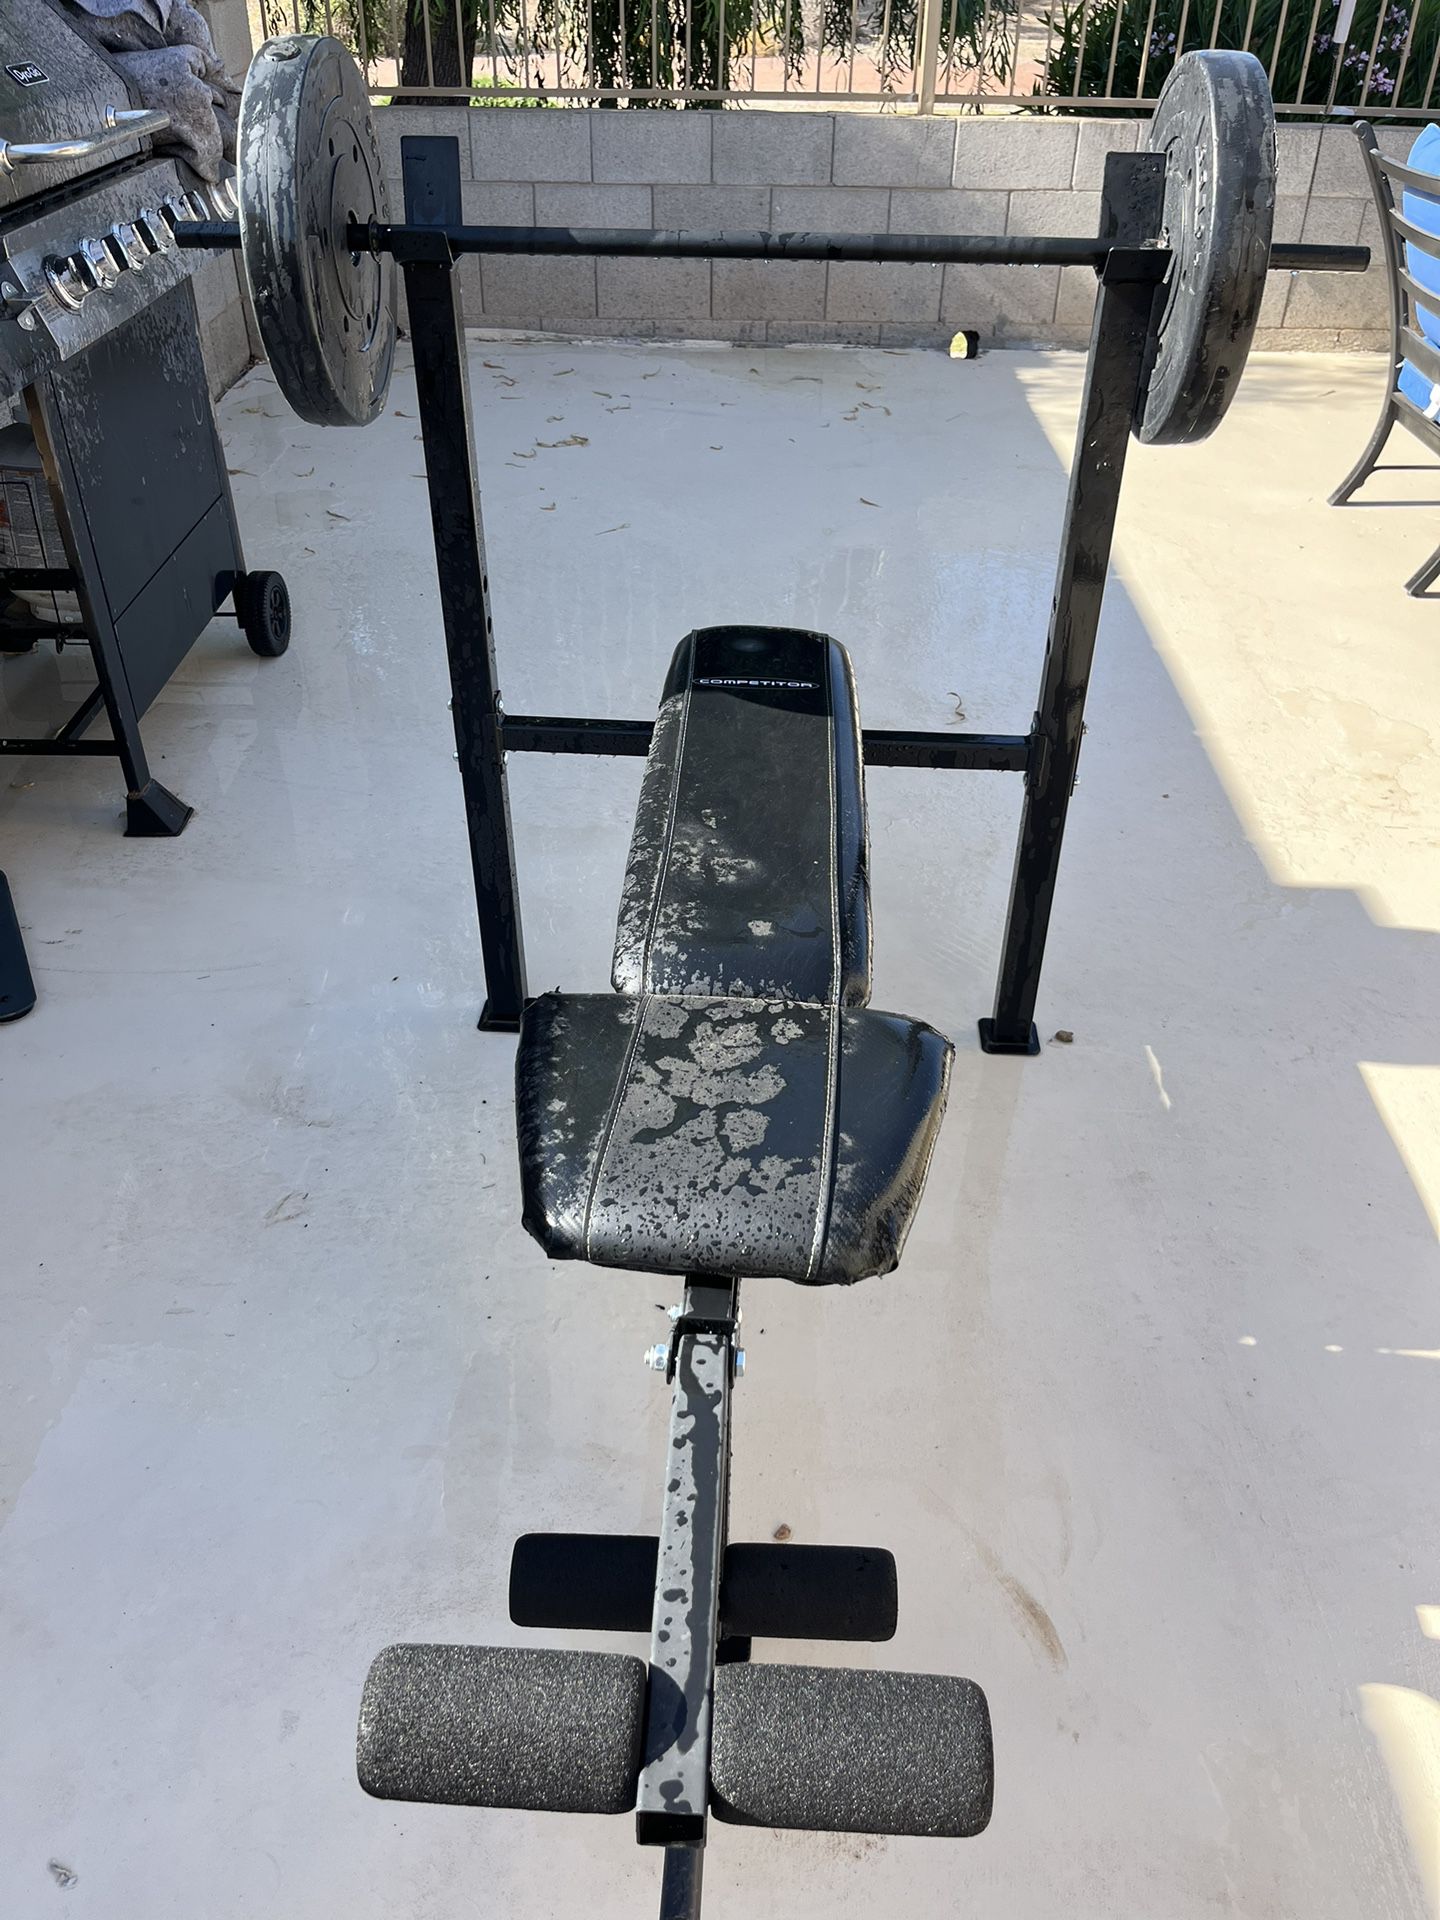 Workout bench and weights